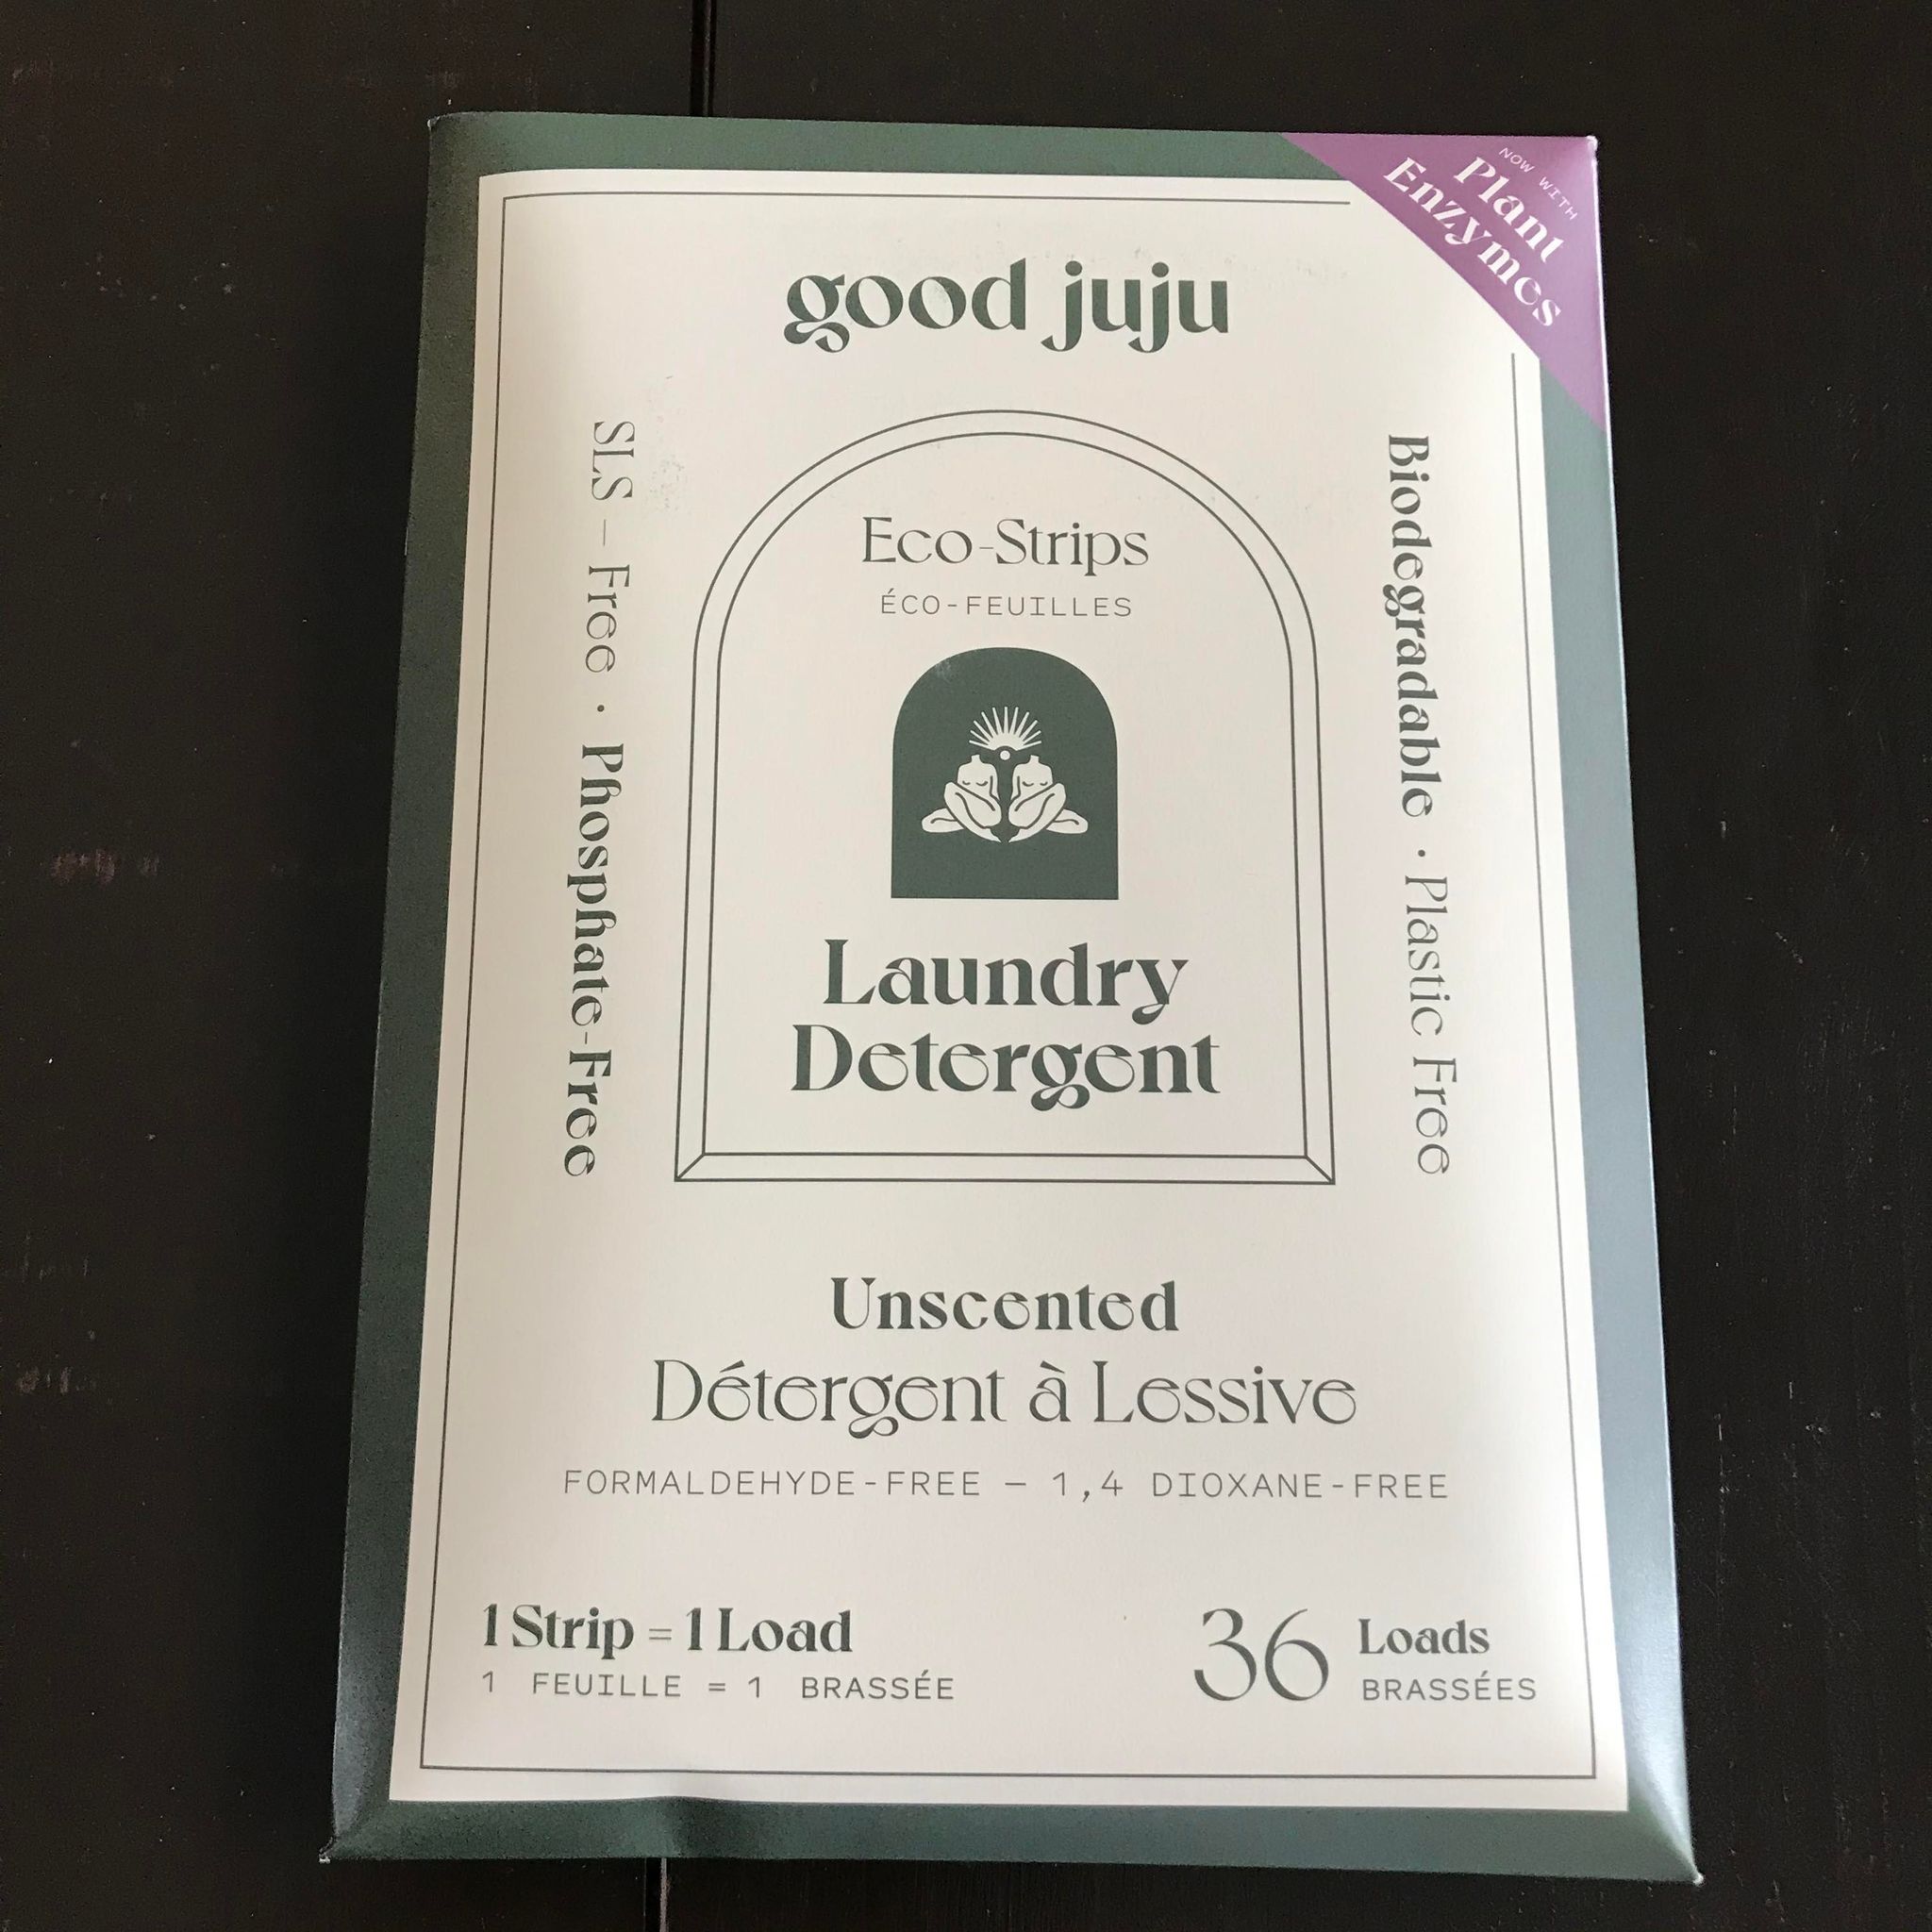 Canadian made Good Juju unscented 36 load laundry detergent eco strips in compostable packaging